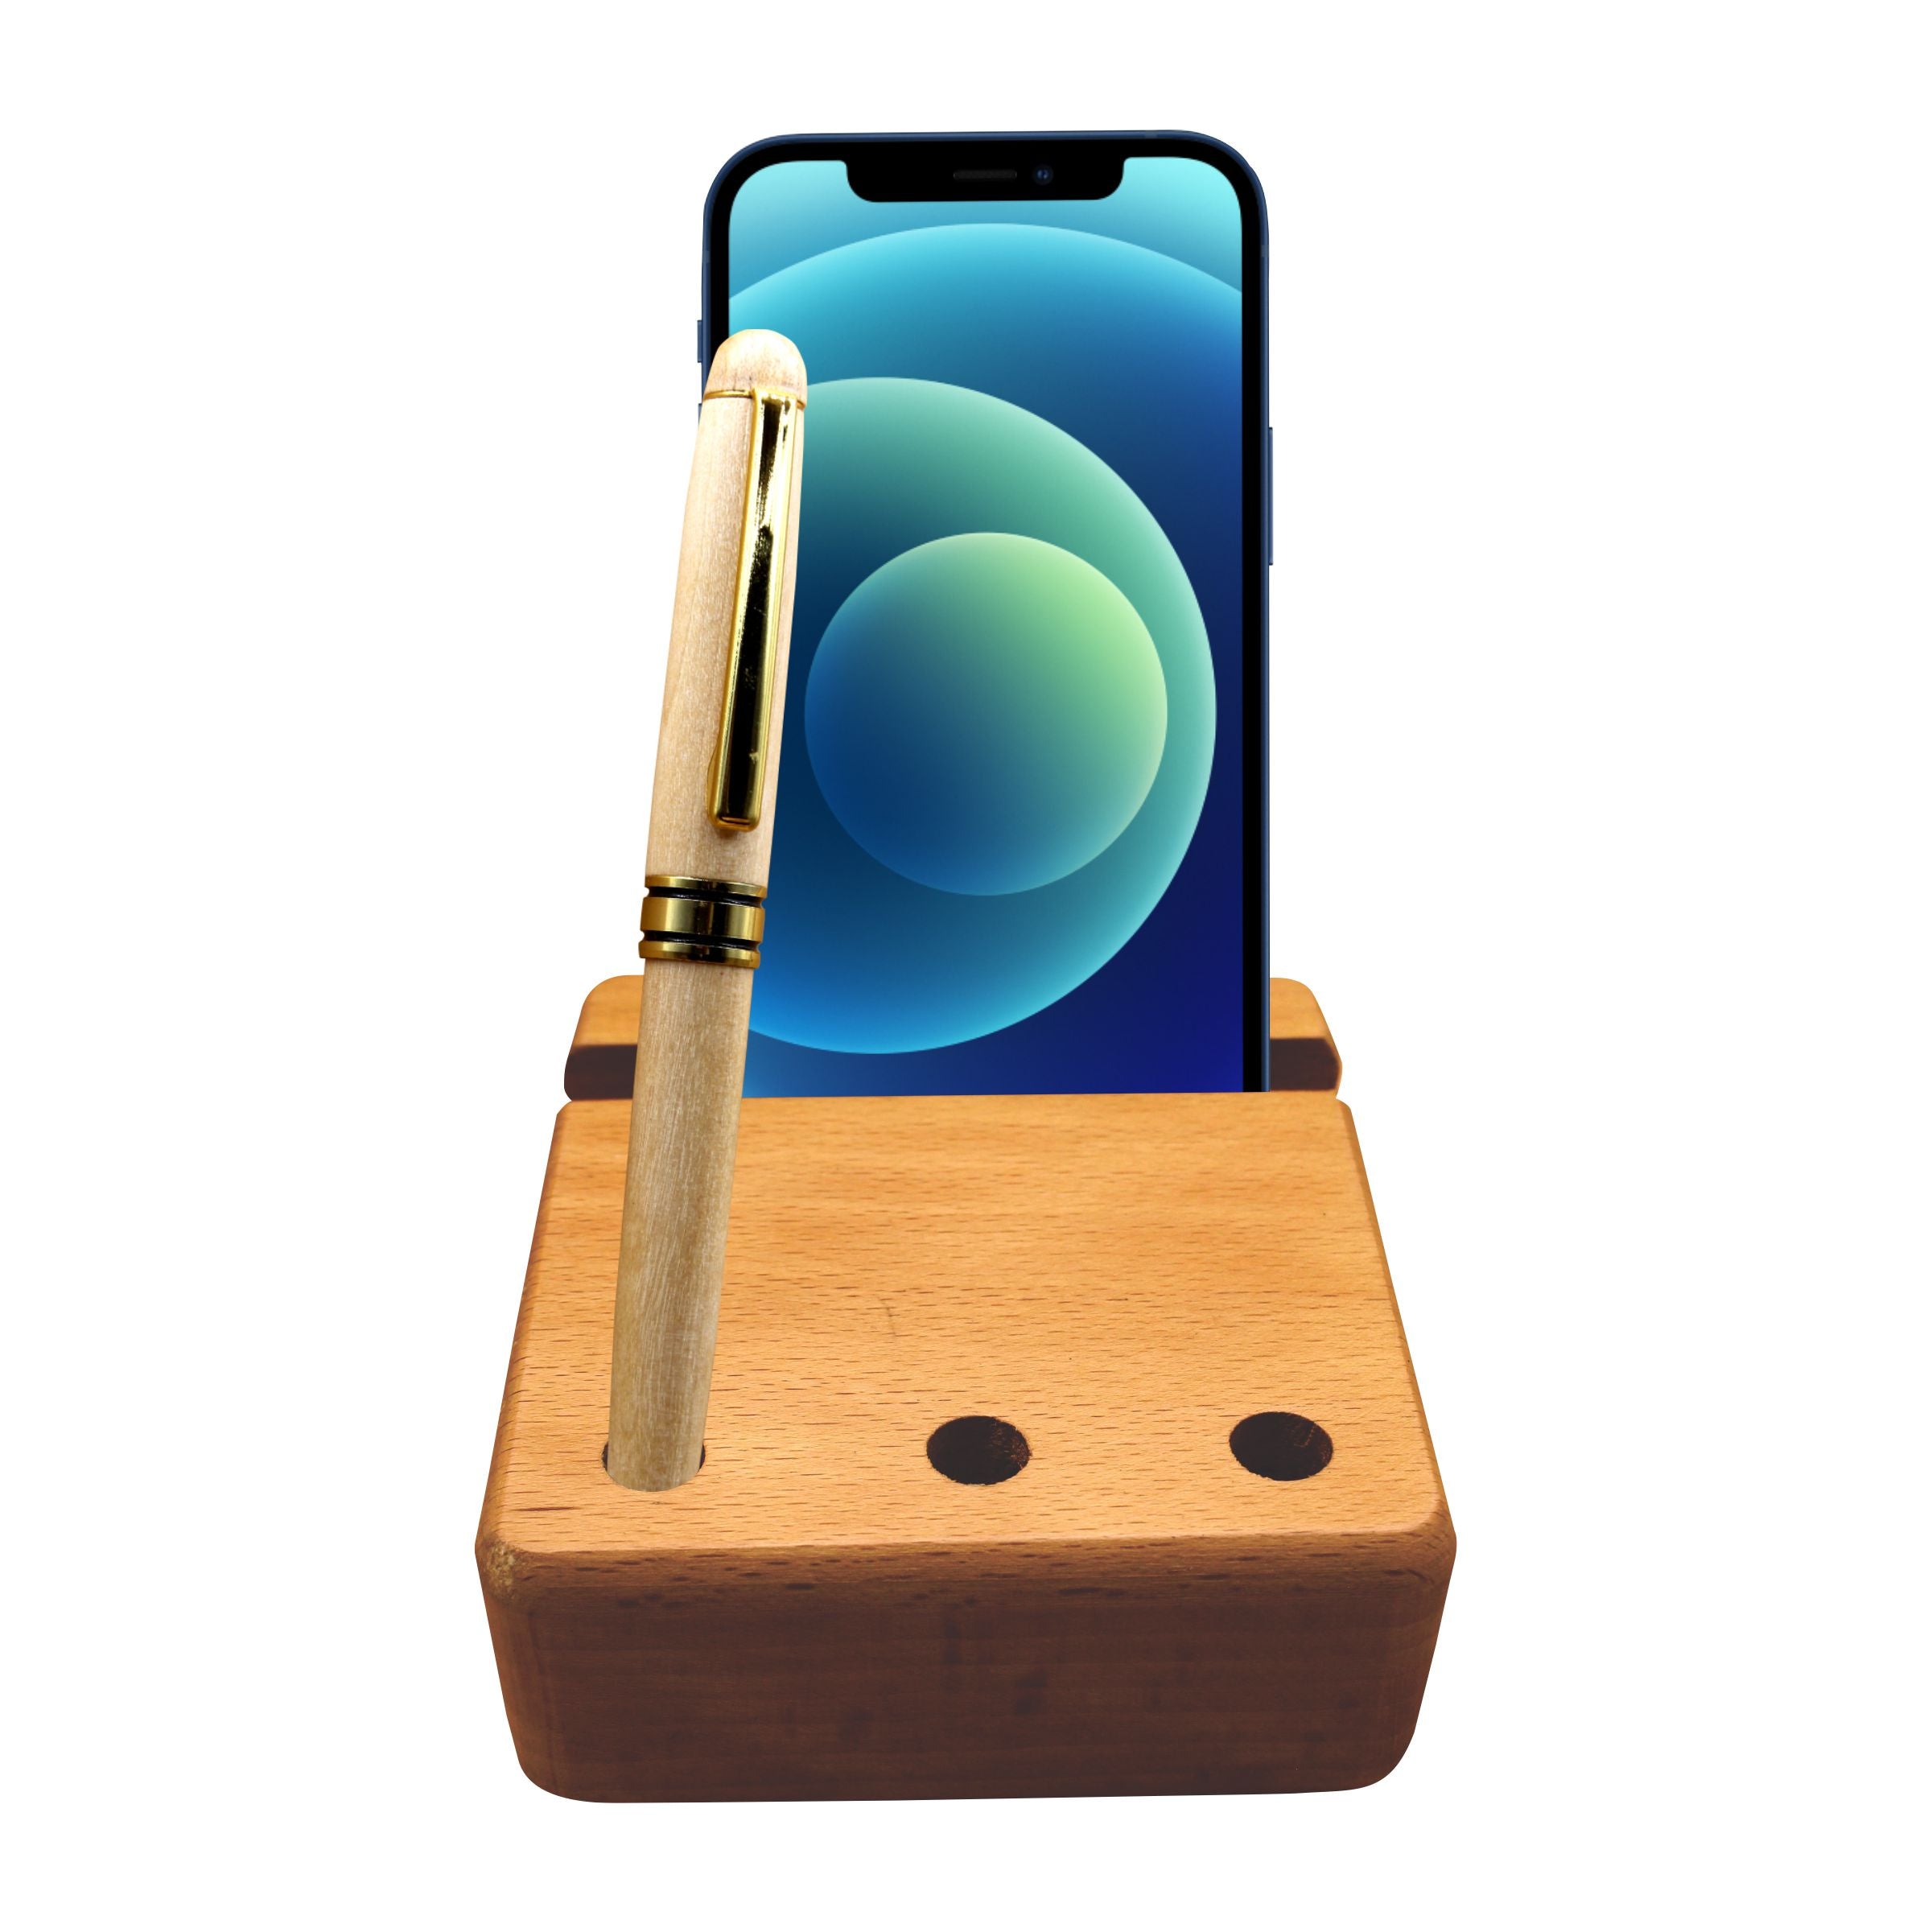 Wooden Pen Jar With Mobile Stand